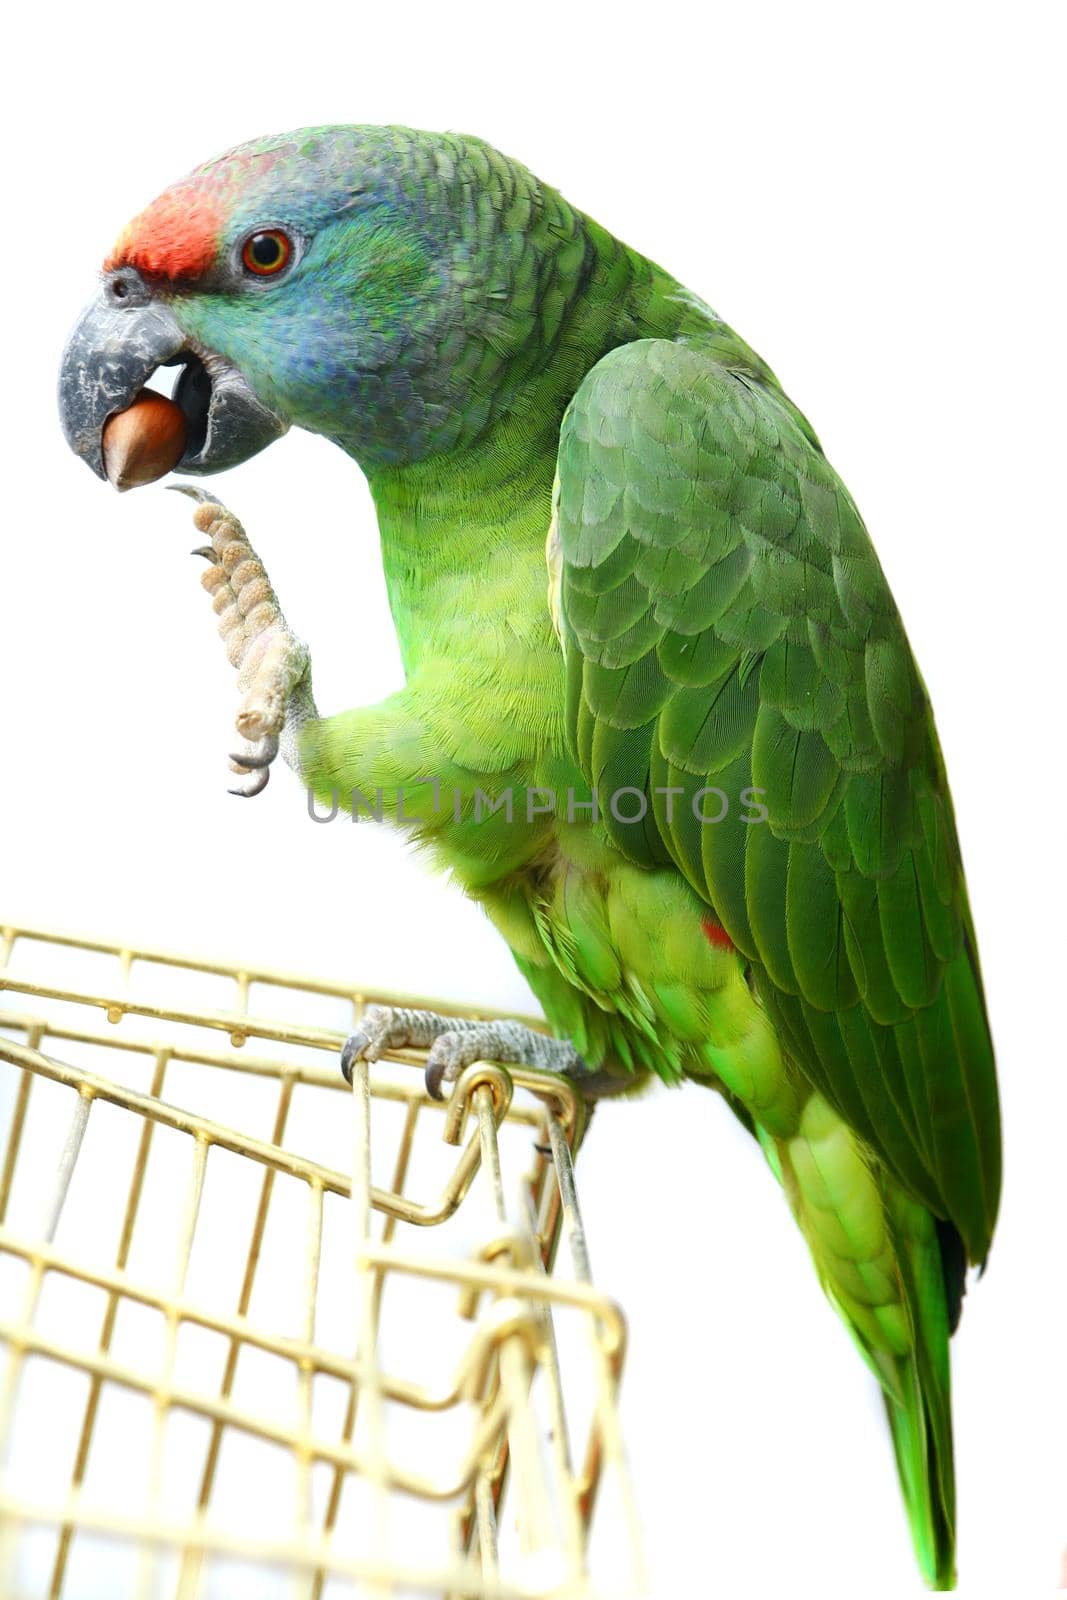 Flying festival Amazon parrot on white by RosaJay